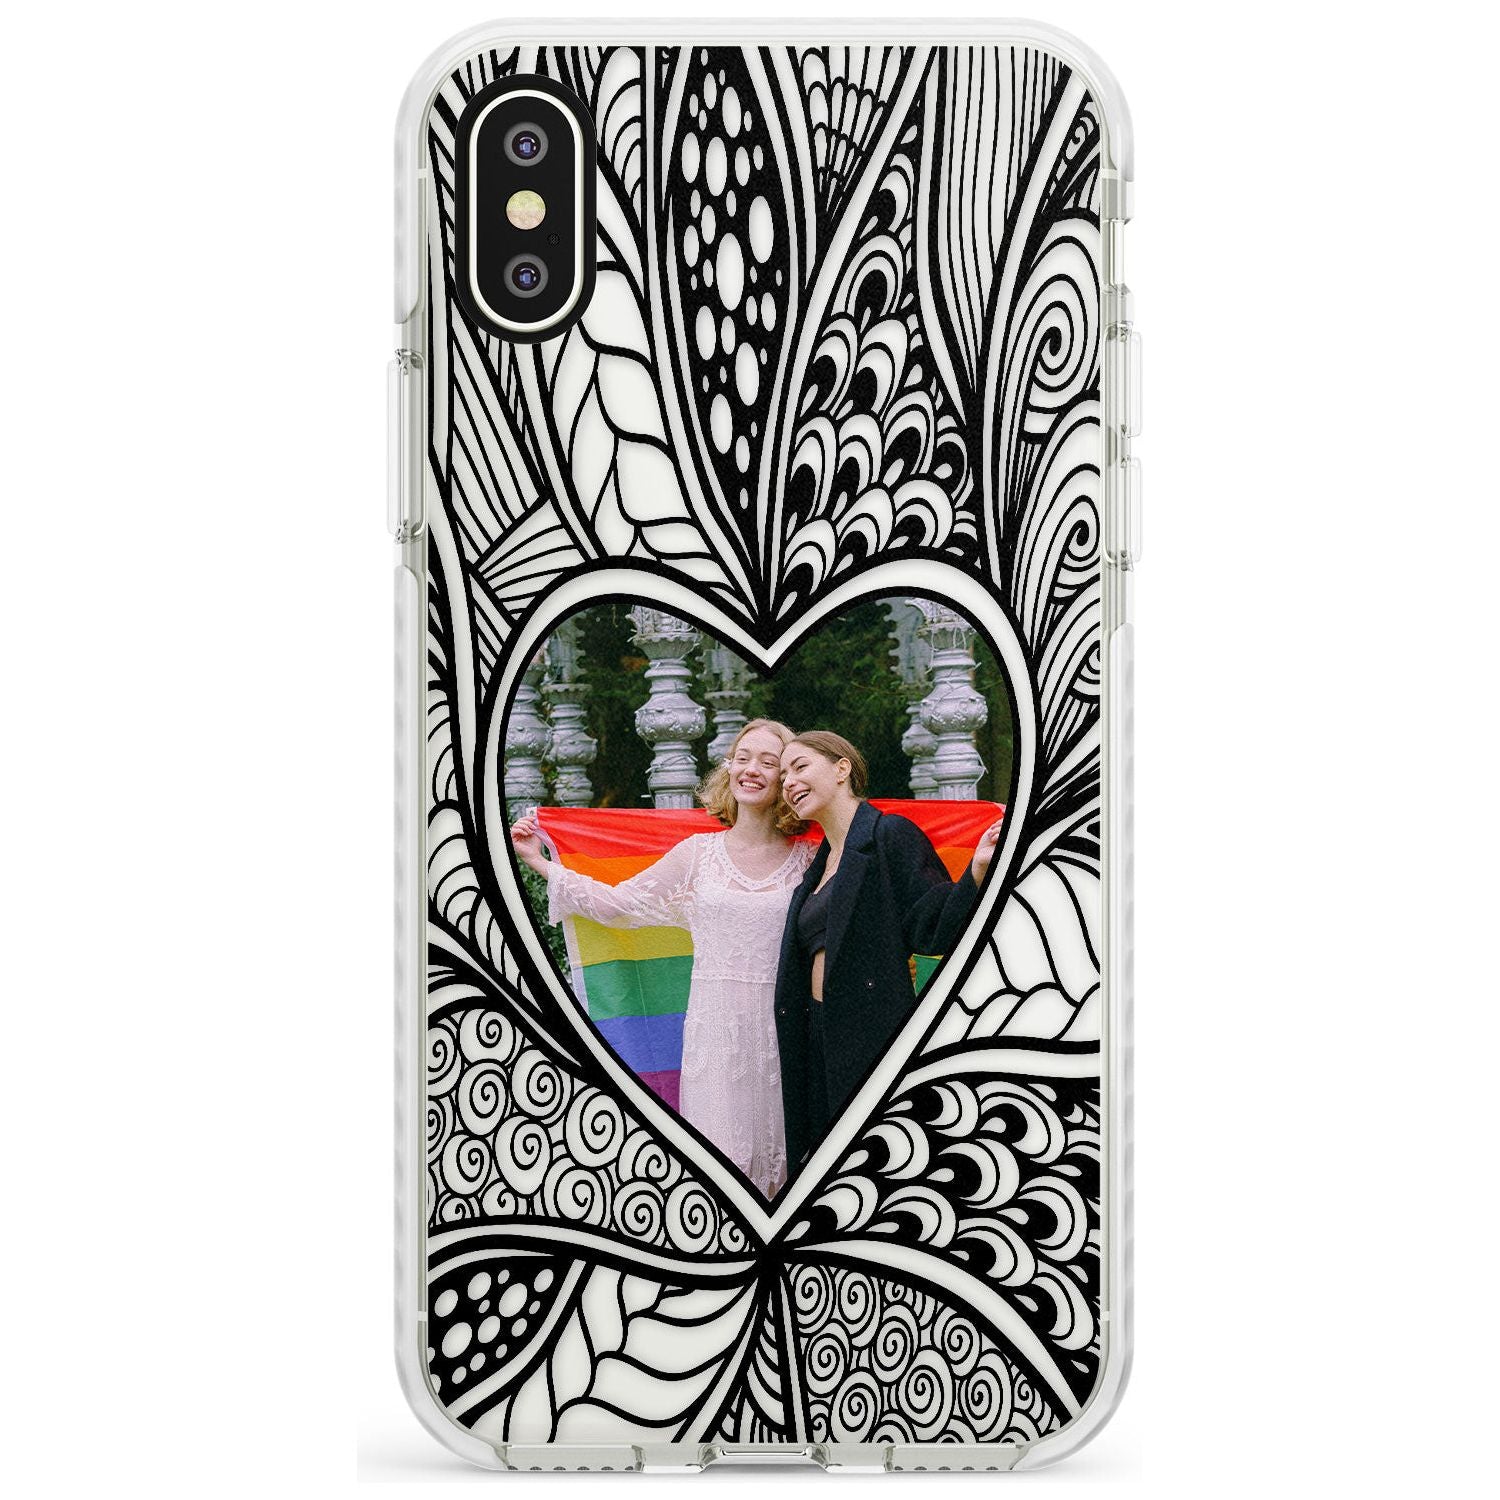 Personalised Henna Heart Photo Case Impact Phone Case for iPhone X XS Max XR